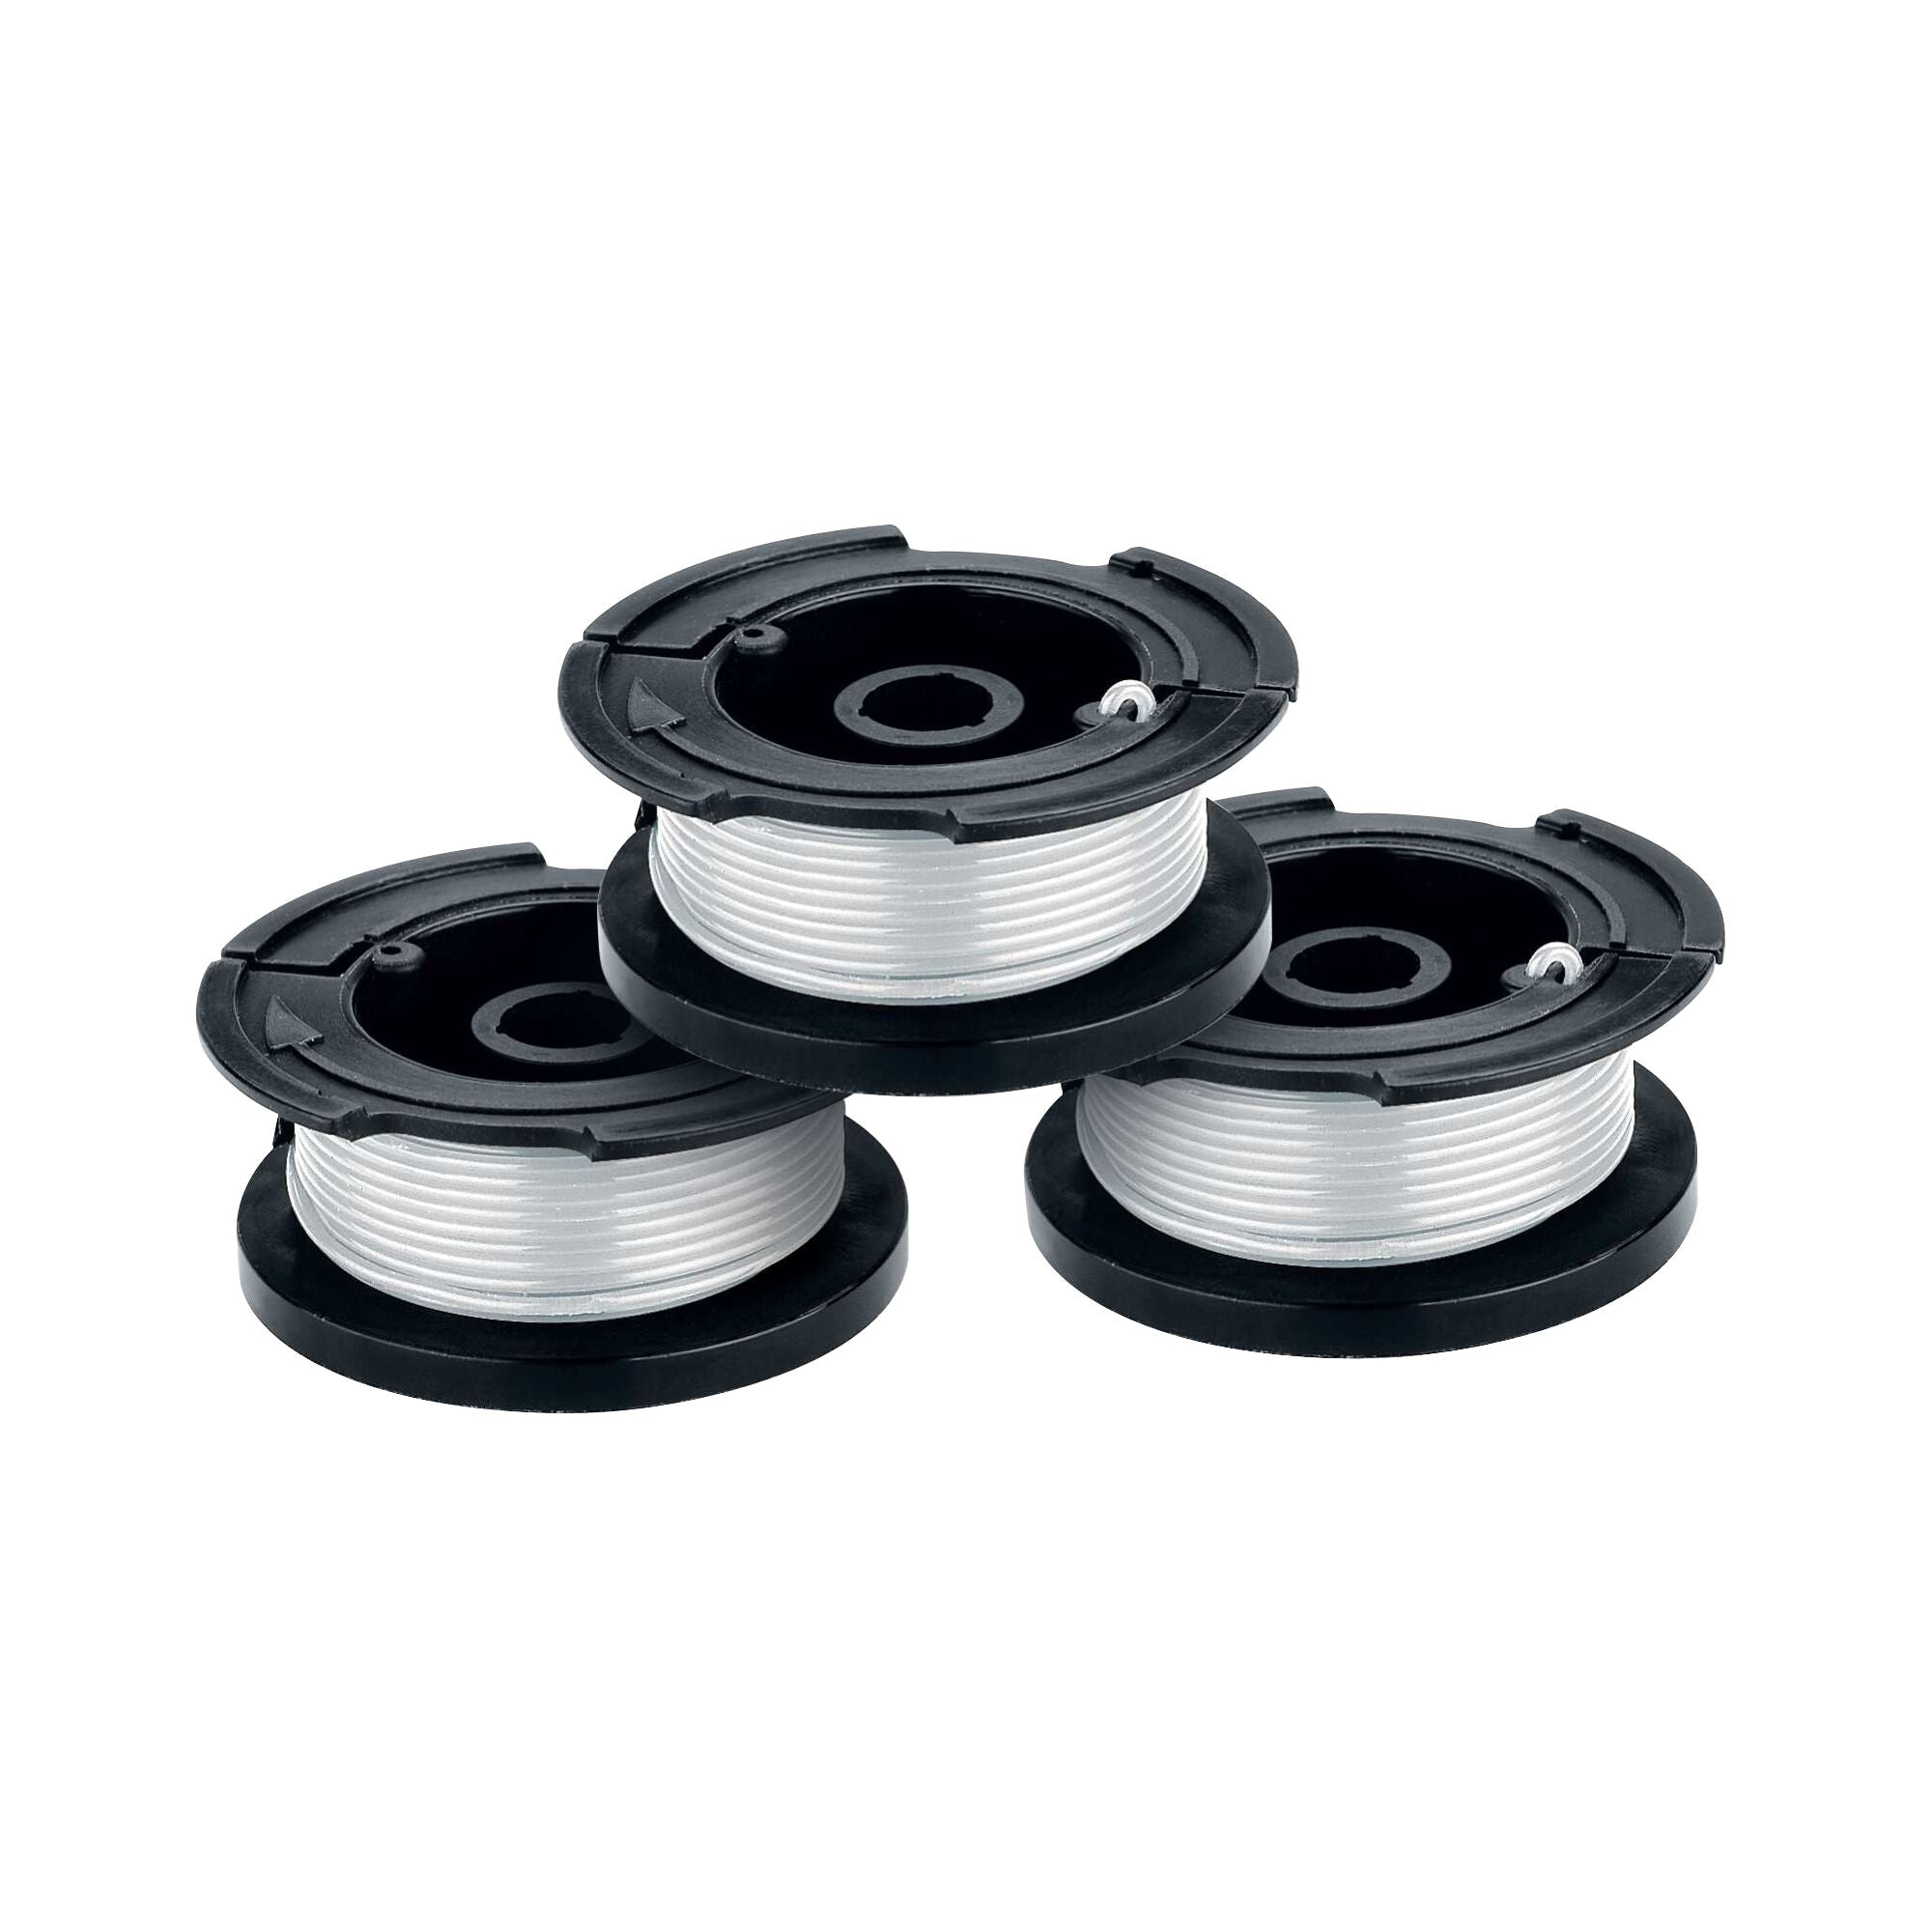 Black and decker pack of 3 0.065 inch 30 foot trimmer line.